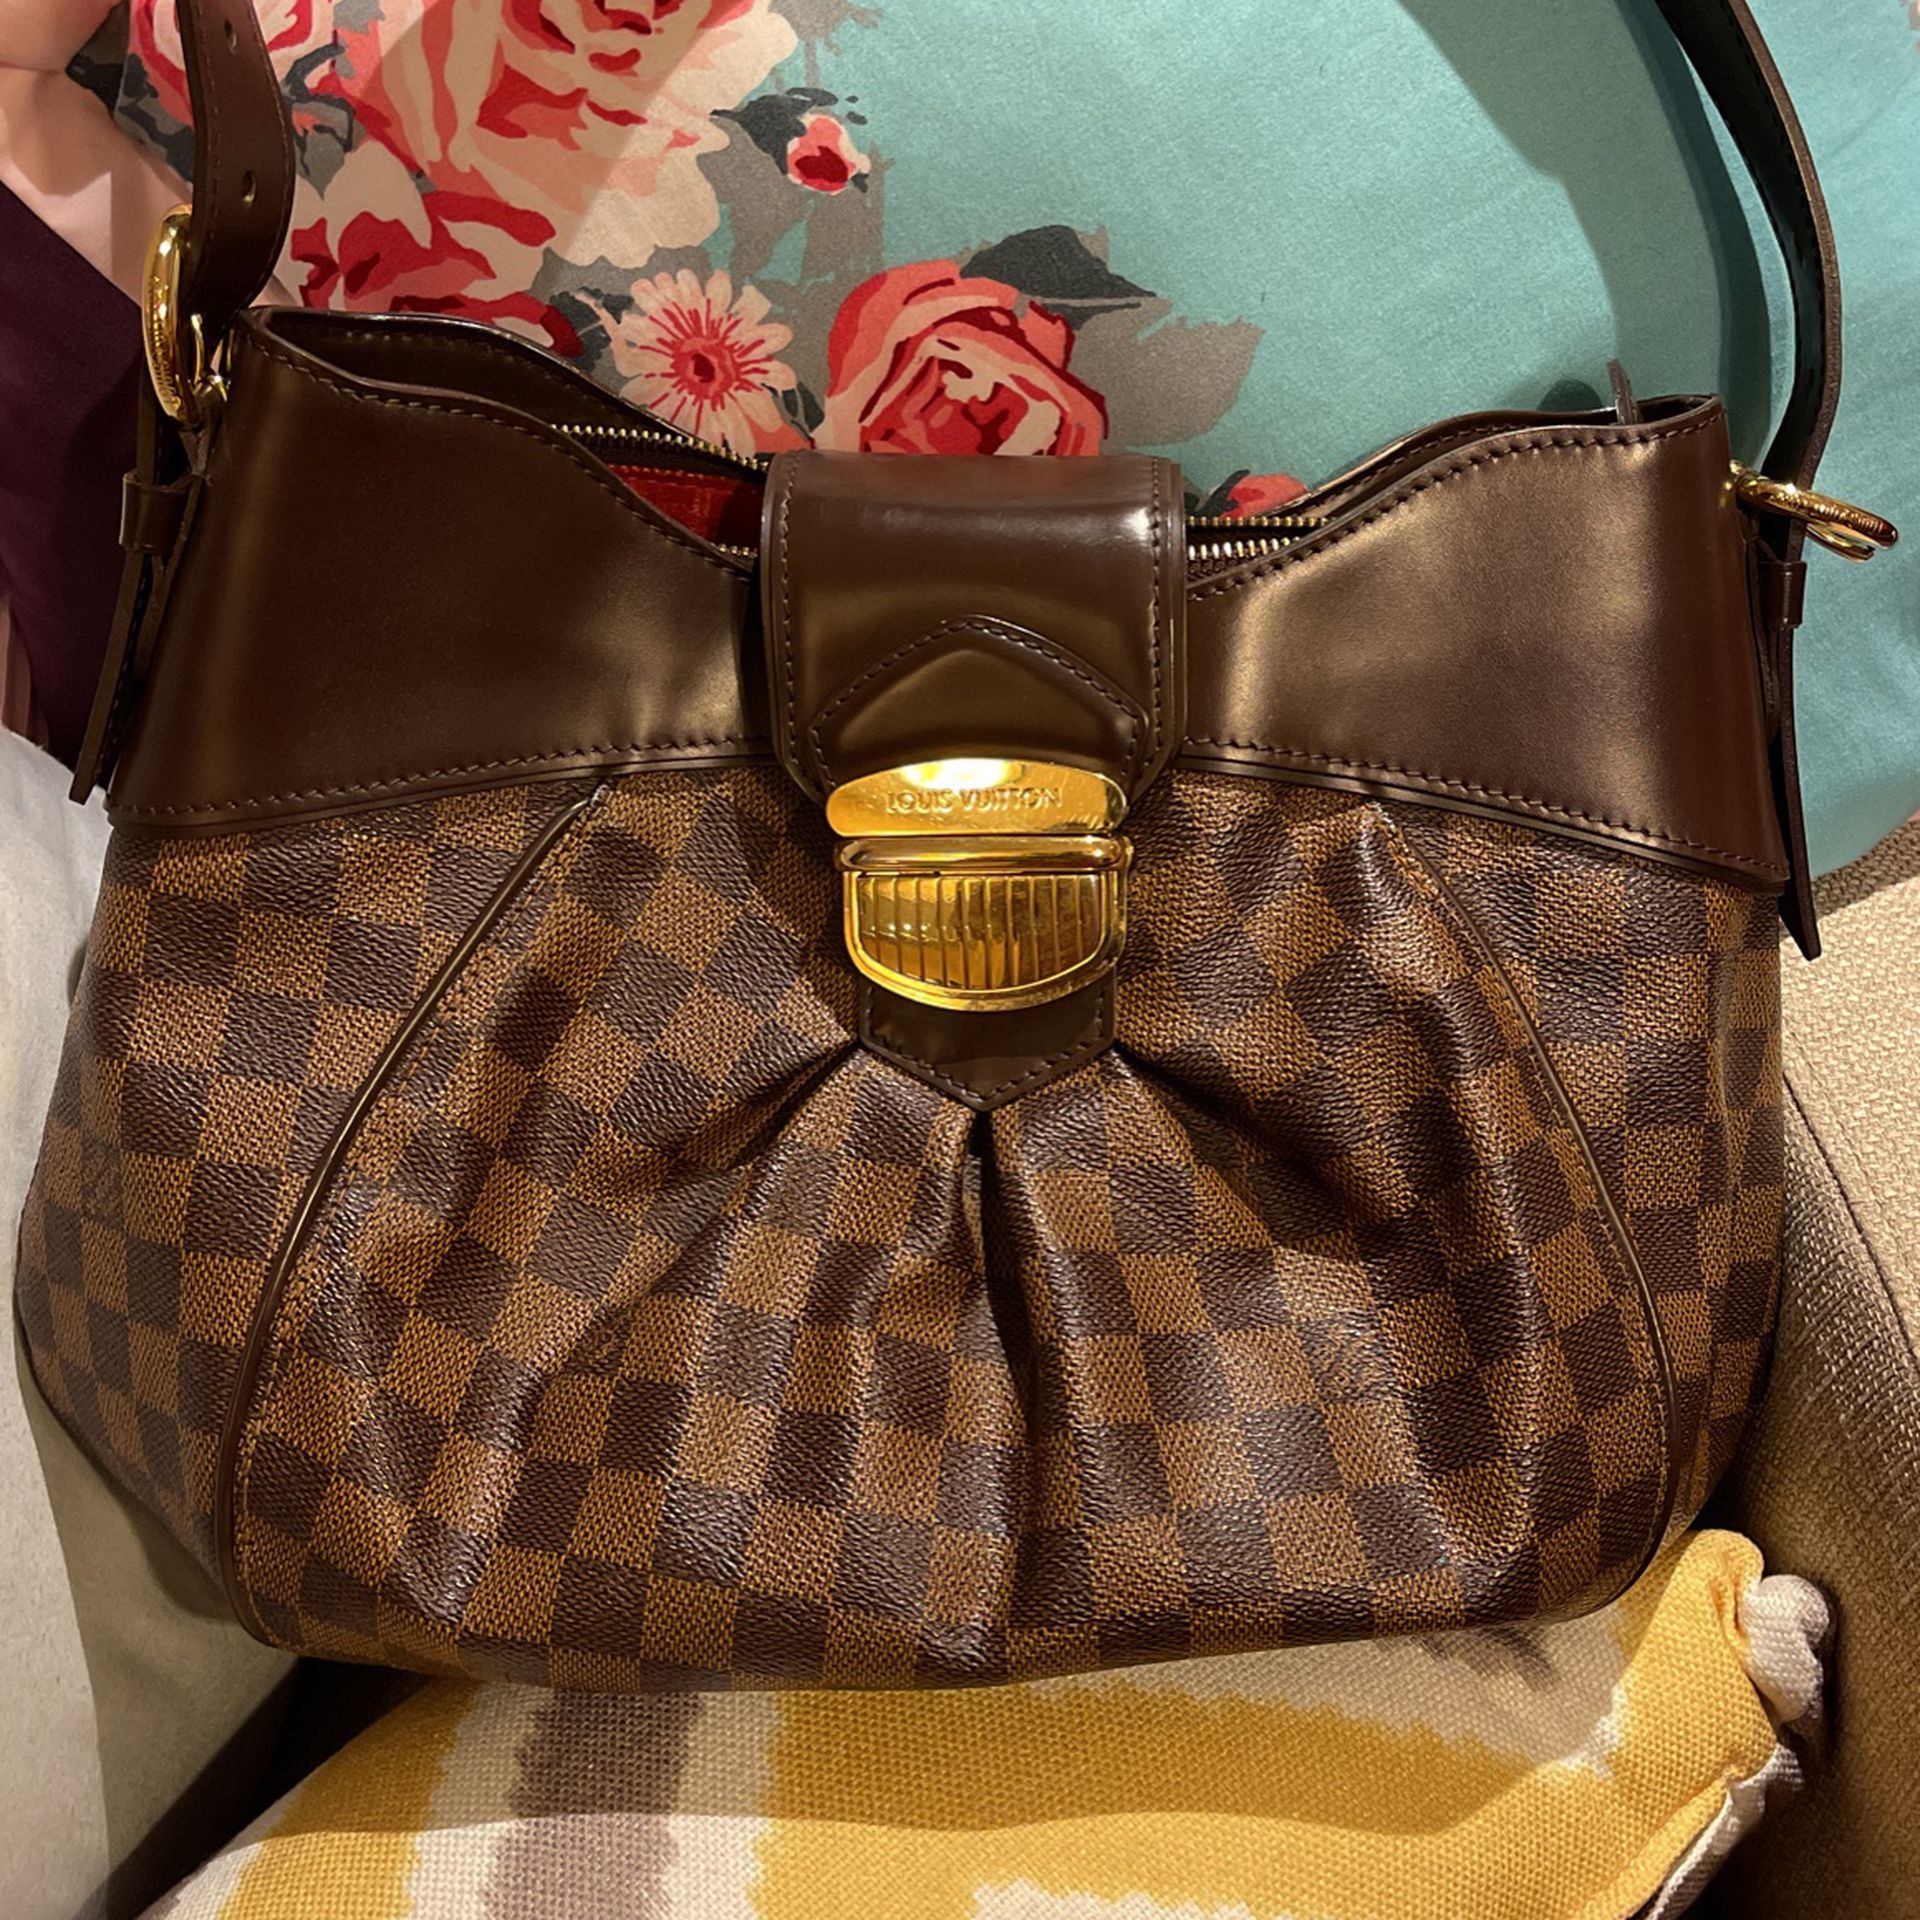 Authentic LV Bag (willing To Trade For Another Authentic LV )